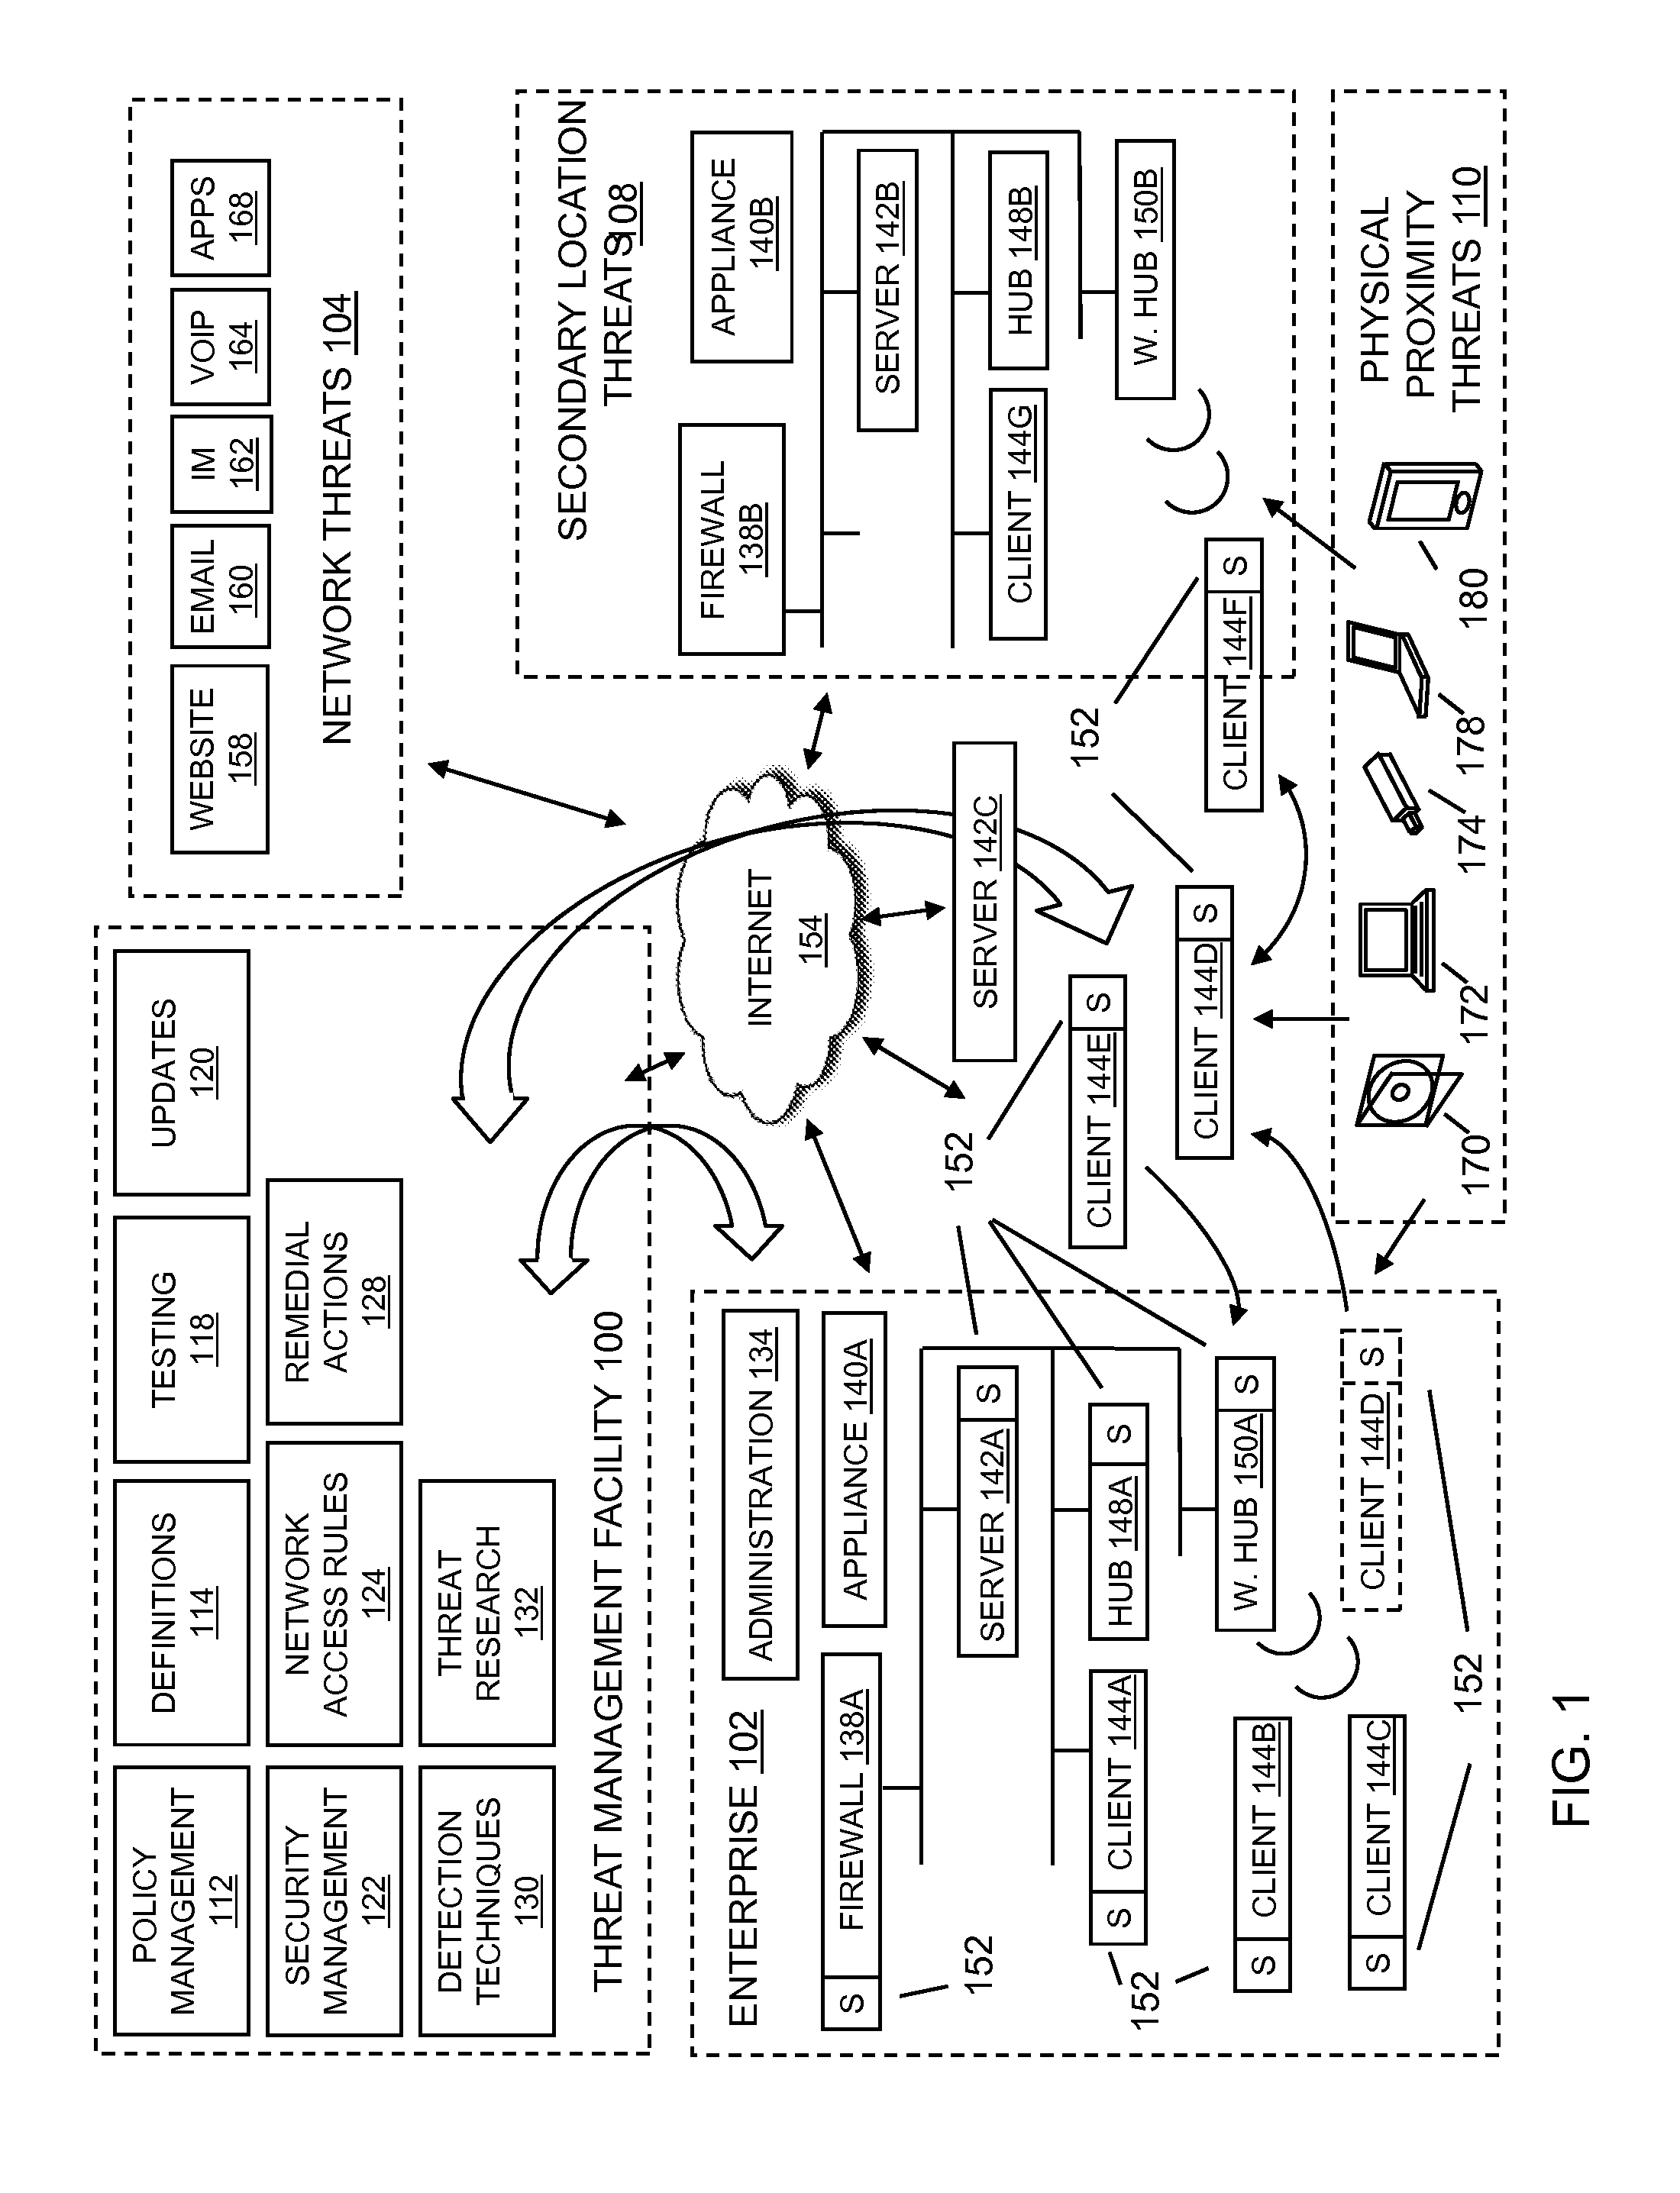 Systems and methods that detect sensitive data leakages from applications